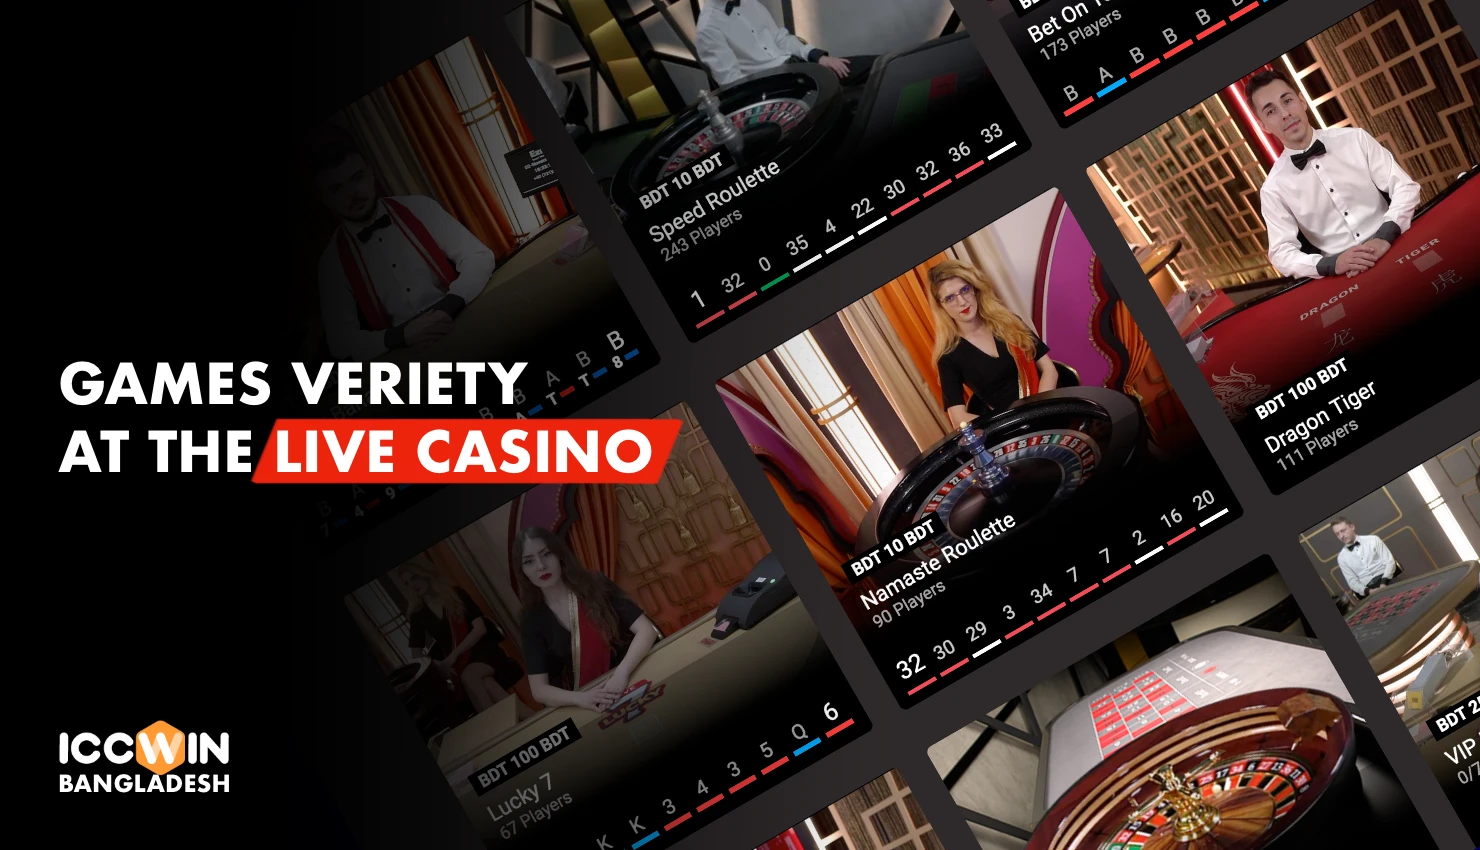 Live casino Iccwin has a wide variety of games with live dealers